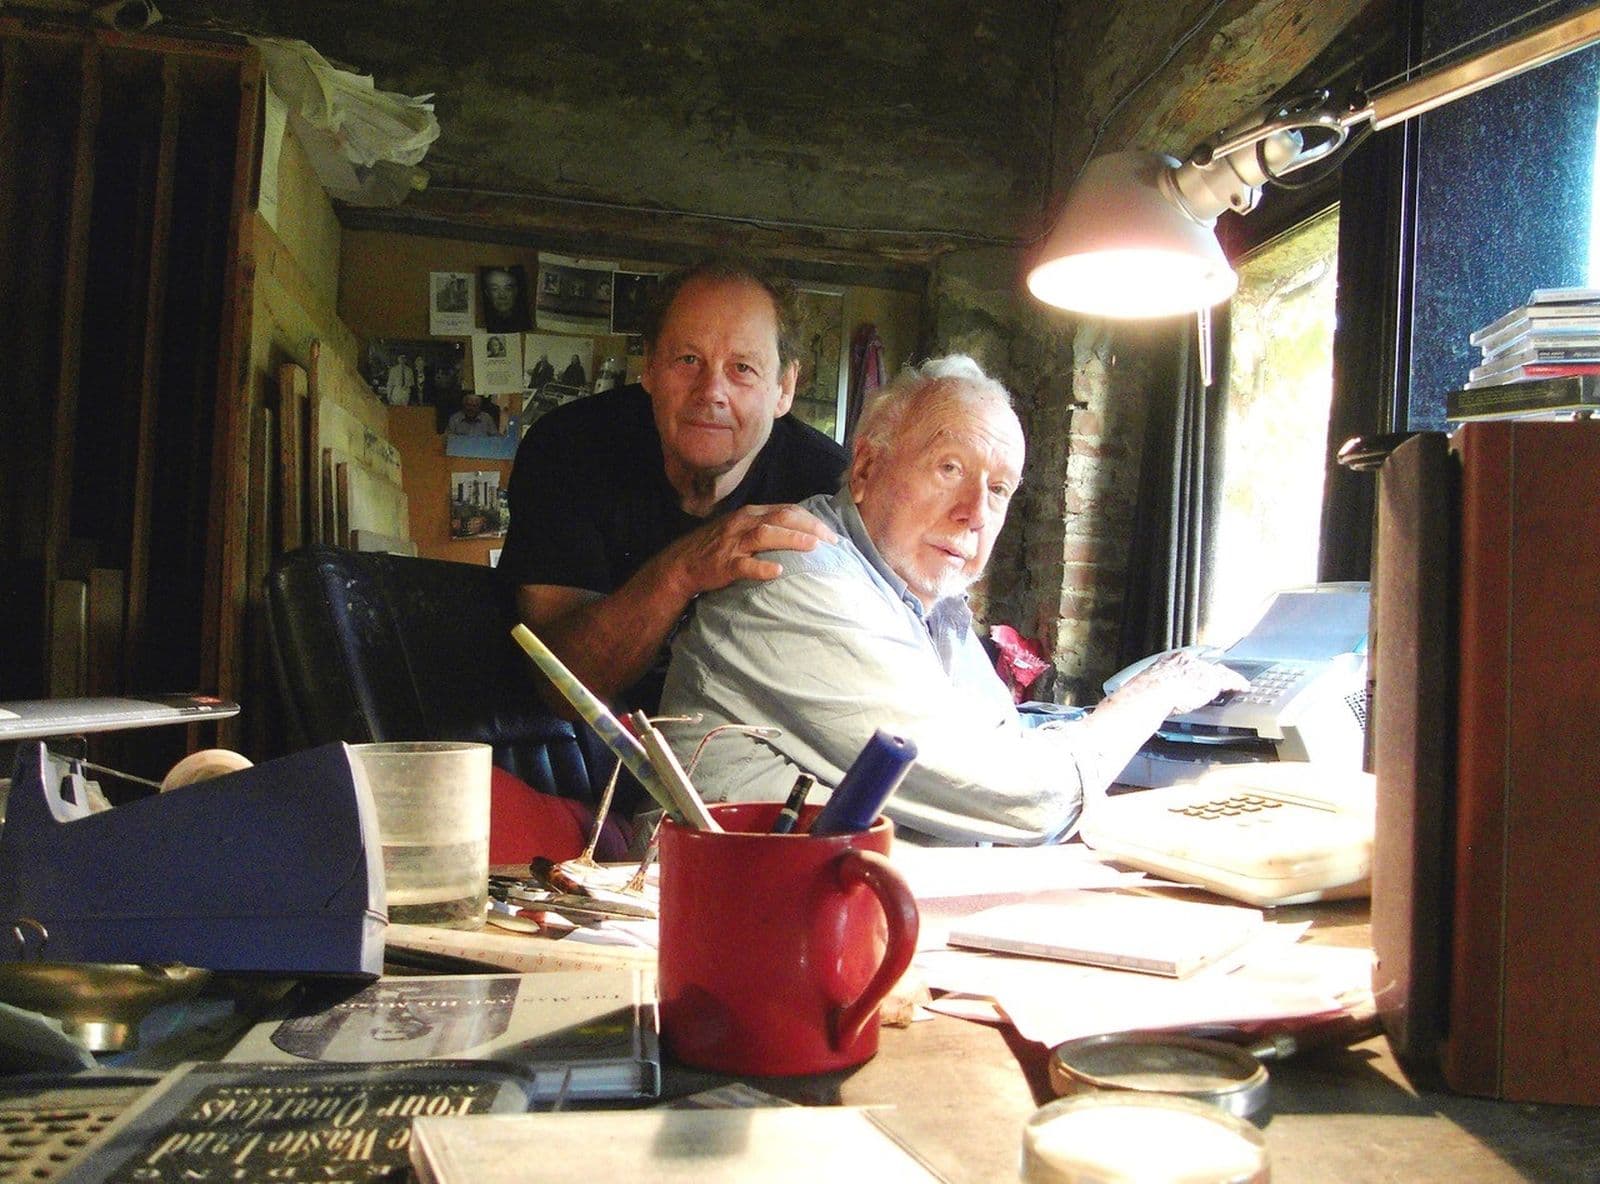 Photograph of Bruce Beresford and Jeffery Smart in the artist's home